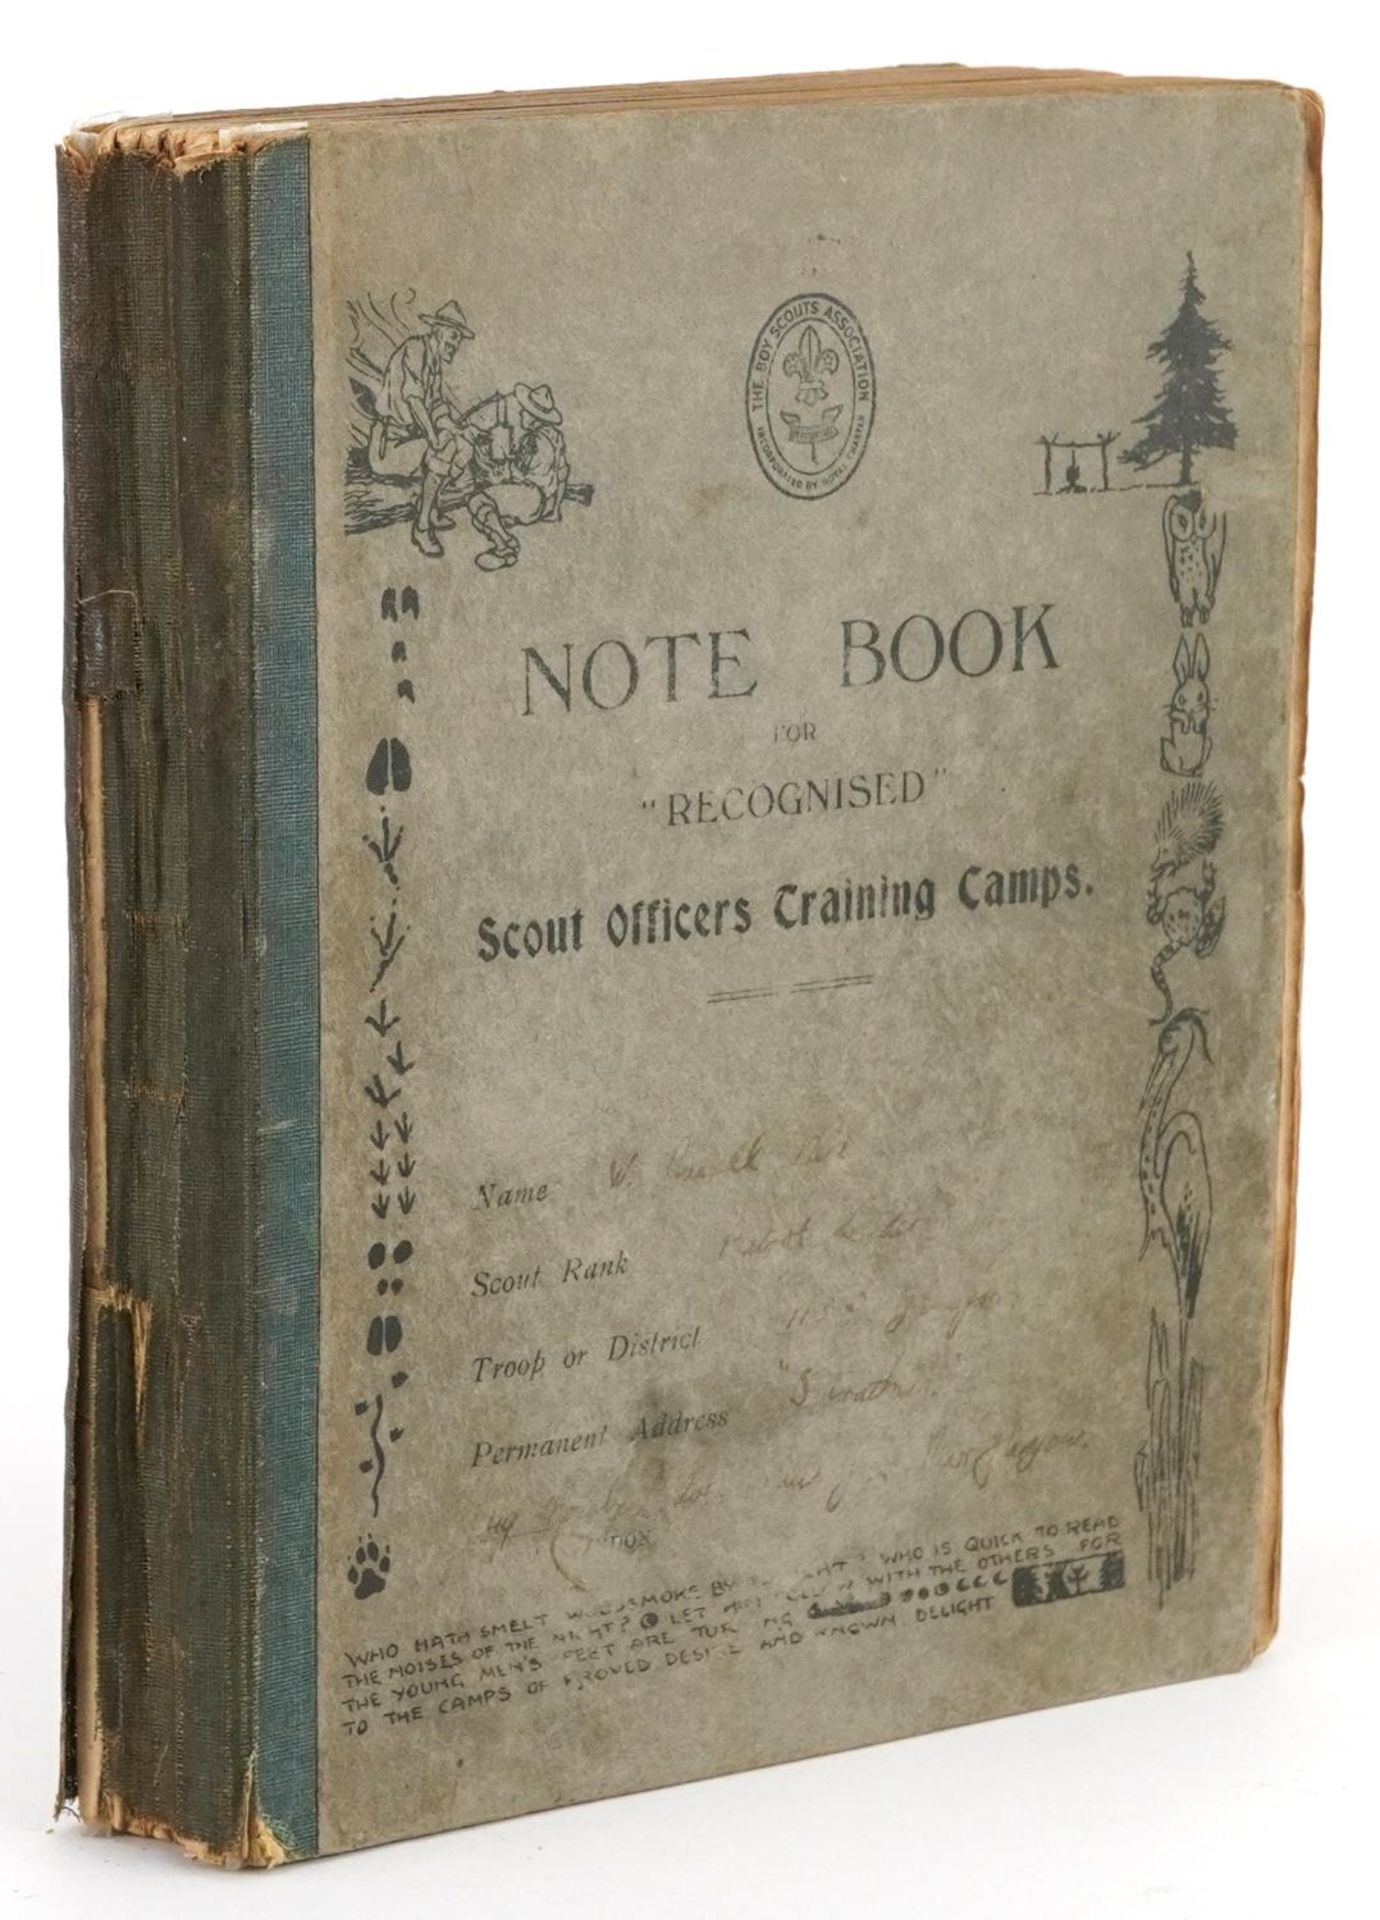 Early 20th century notebook for Recognised Scout Officers training camps relating to William Russell